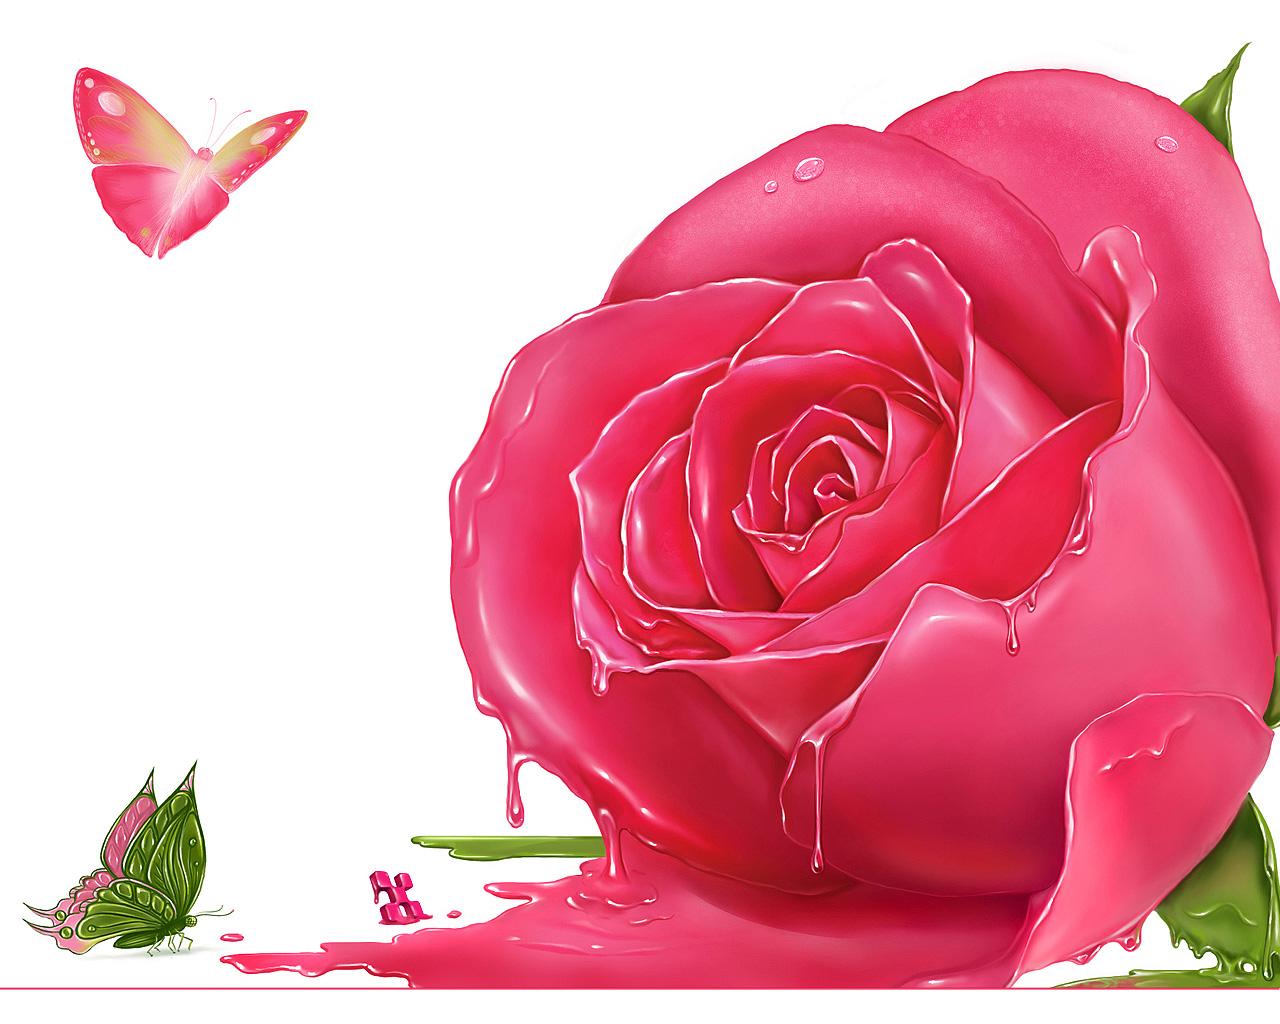  roses pics of pink roses pink roses background free wallpapers